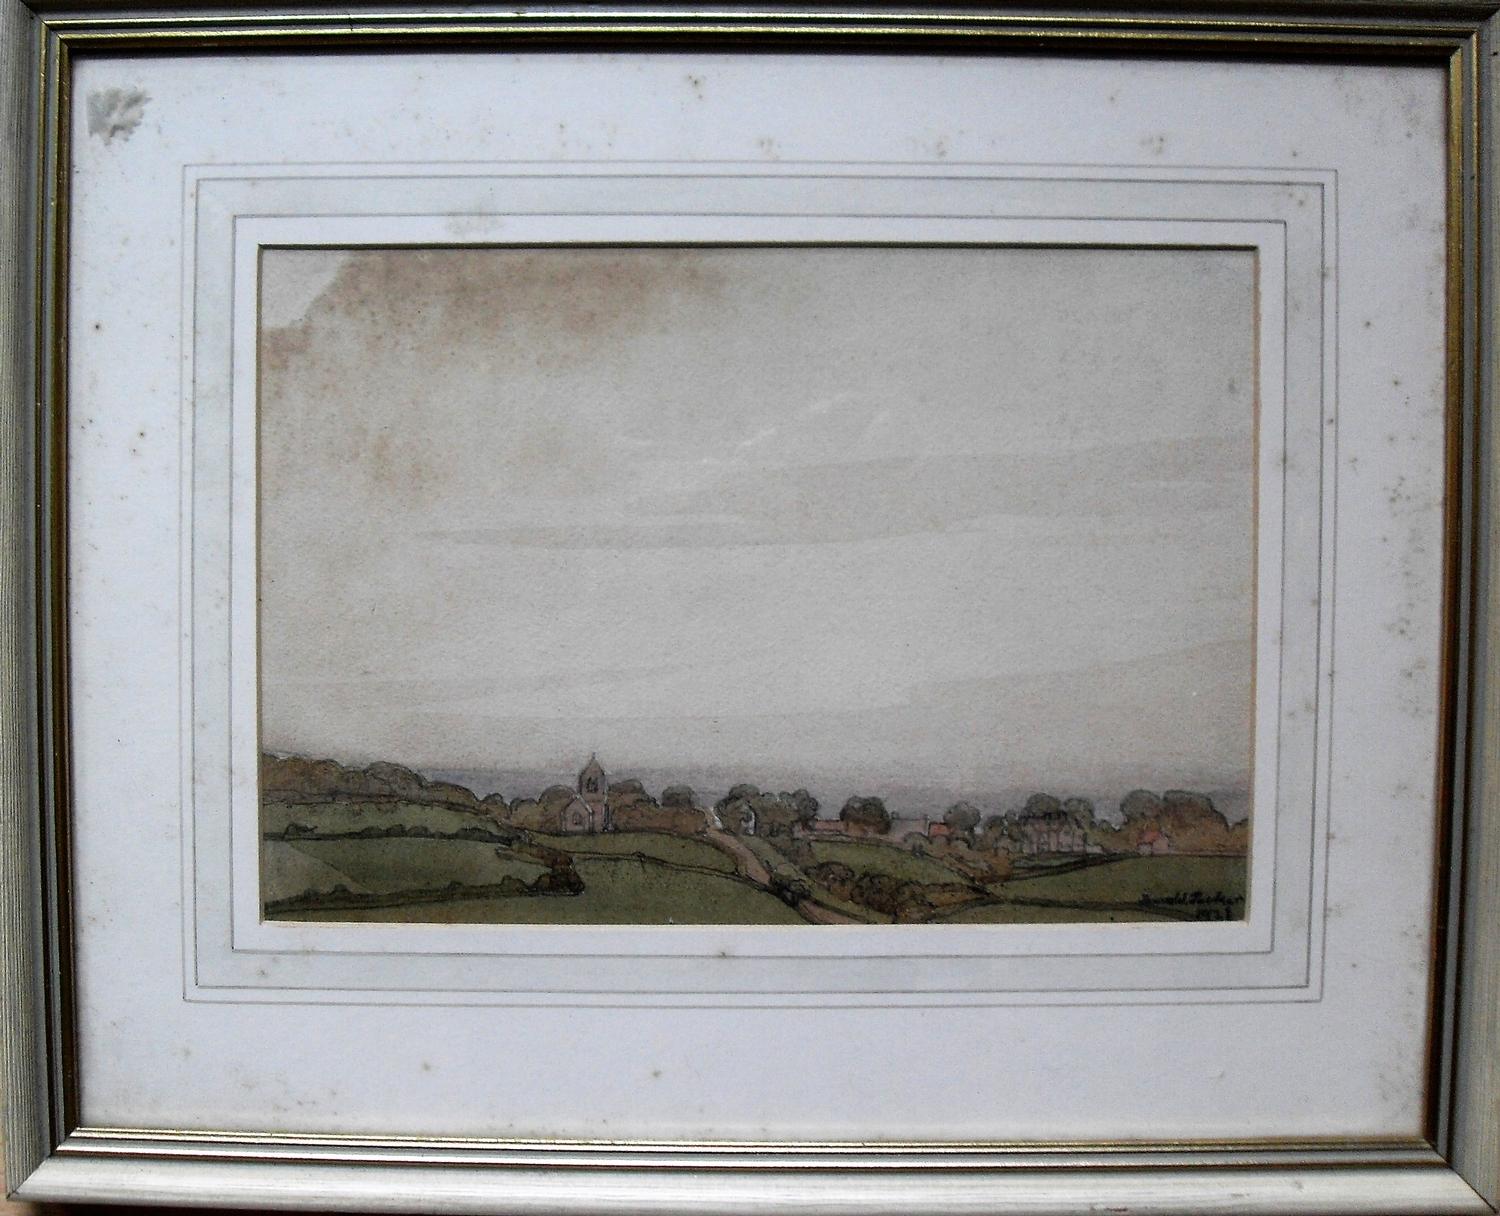 James W. Tucker A.R.C.A., F.R.S.A (1898 to 1972), BLUE BANK SHIGHTS, VIEW FROM WAGGLE BARNBY,